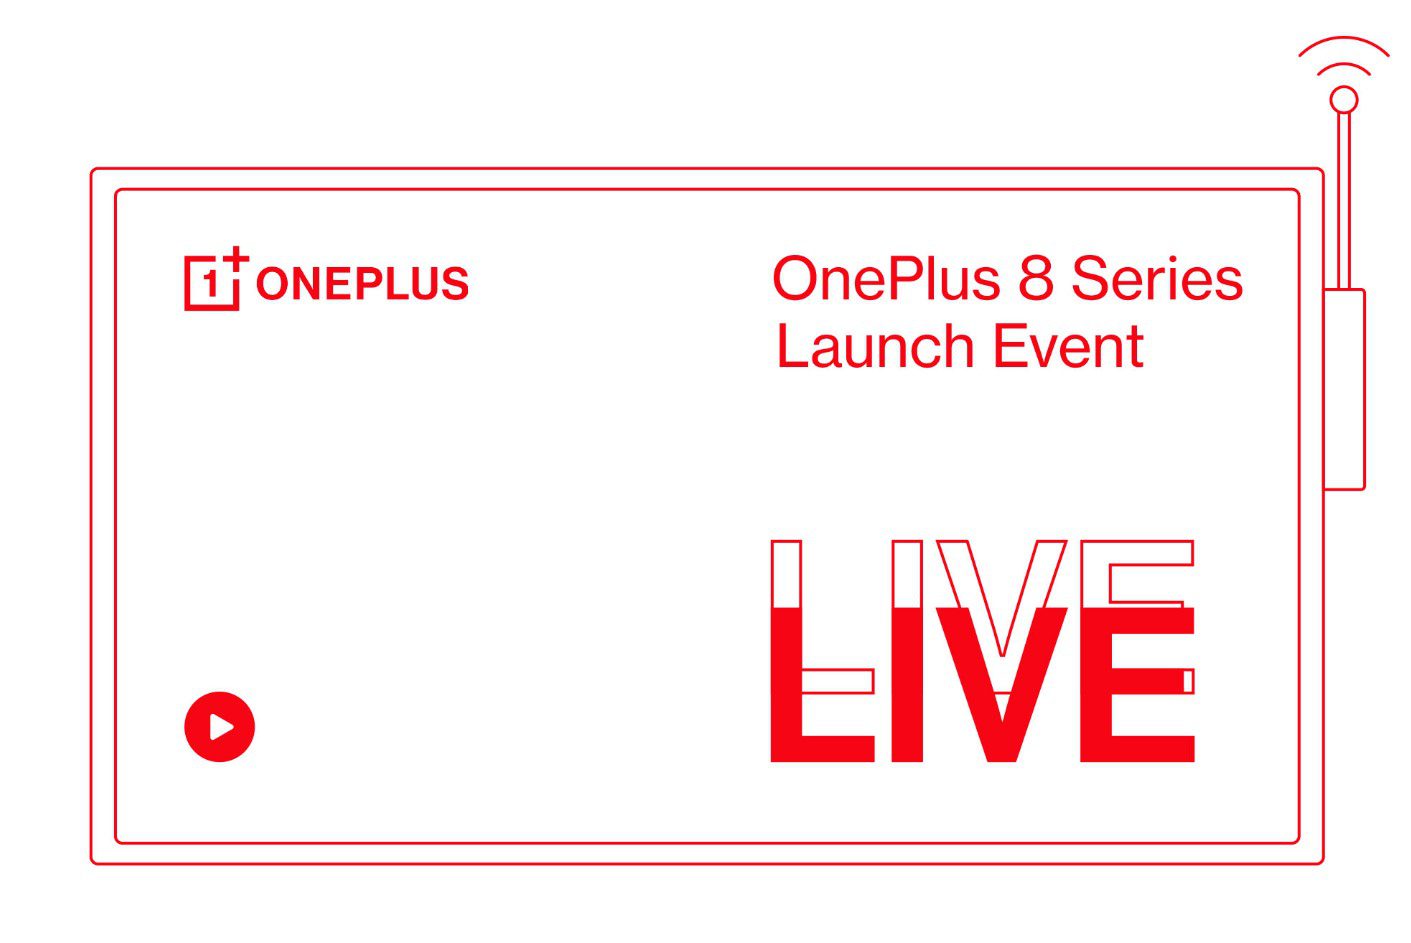 Here is how to watch the OnePlus 8 launch event